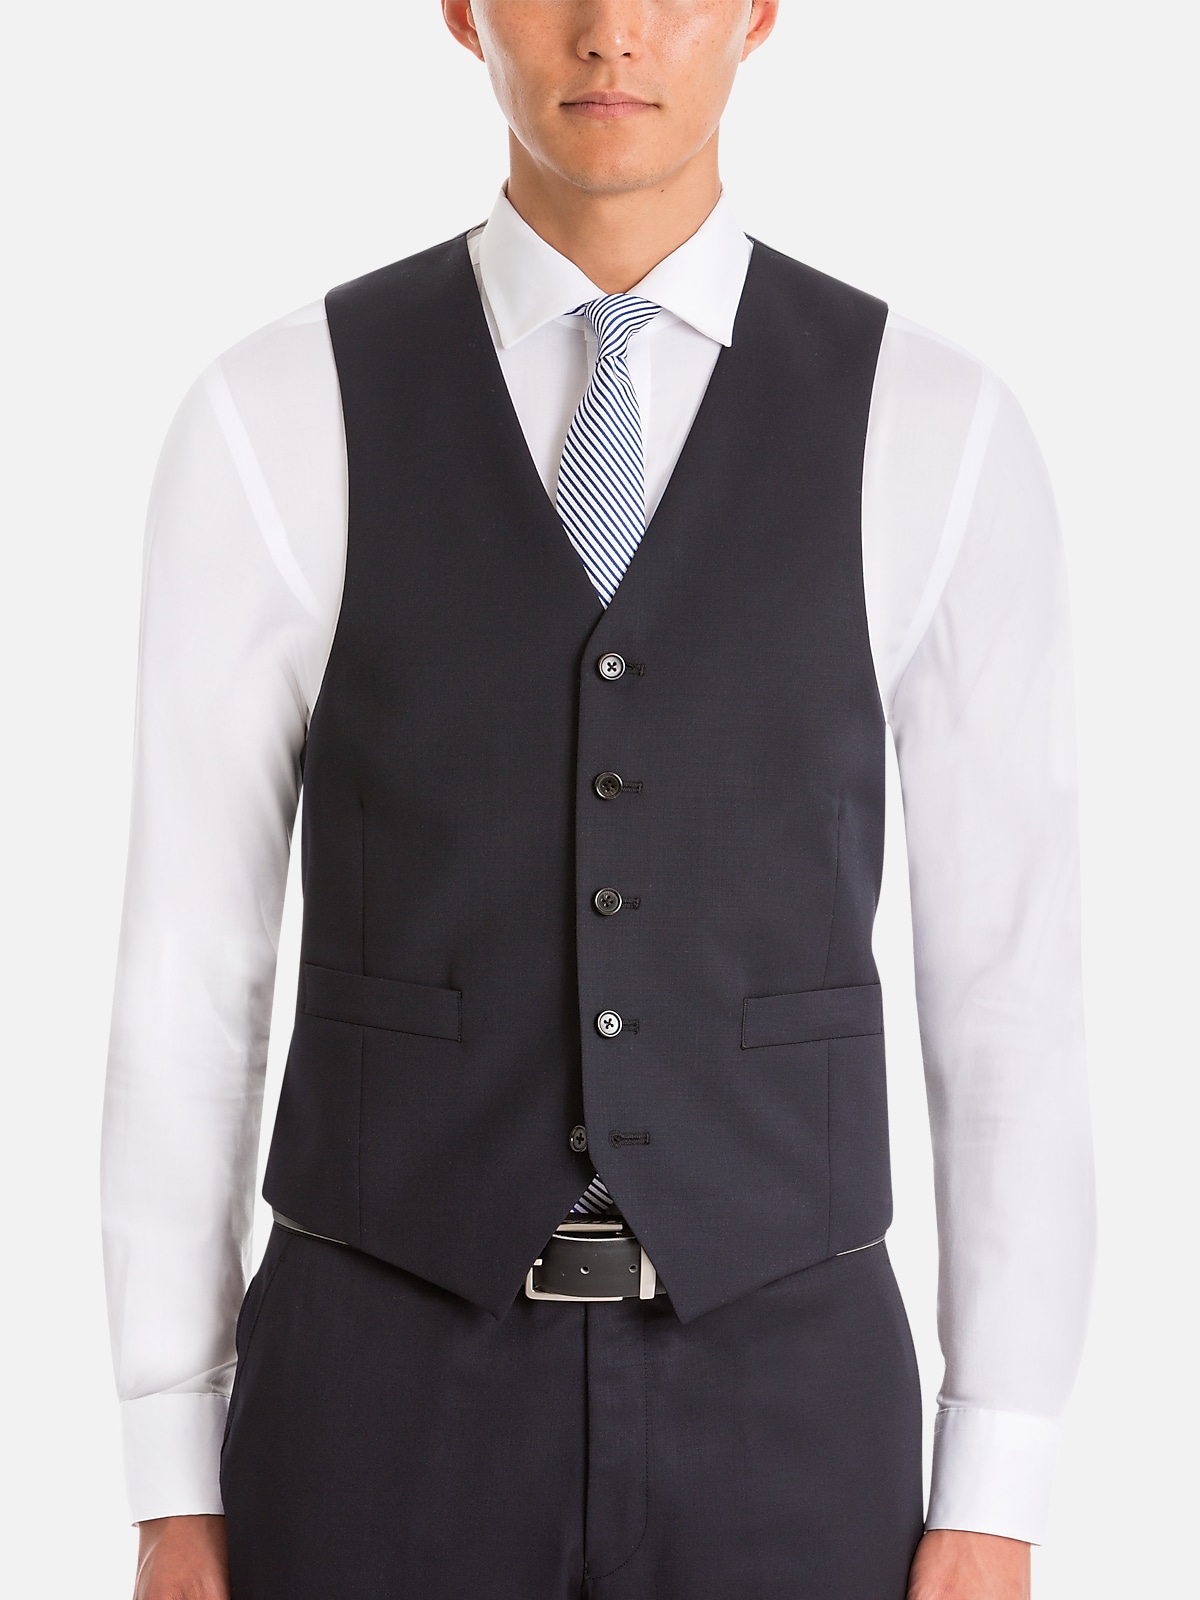 https://image.menswearhouse.com/is/image/TMW/TMW_3VDM_01_LAUREN_BY_RALPH_LAUREN_SUIT_SEPARATE_VESTS_NAVY_TWILL_MAIN?imPolicy=pdp-zoom-mob